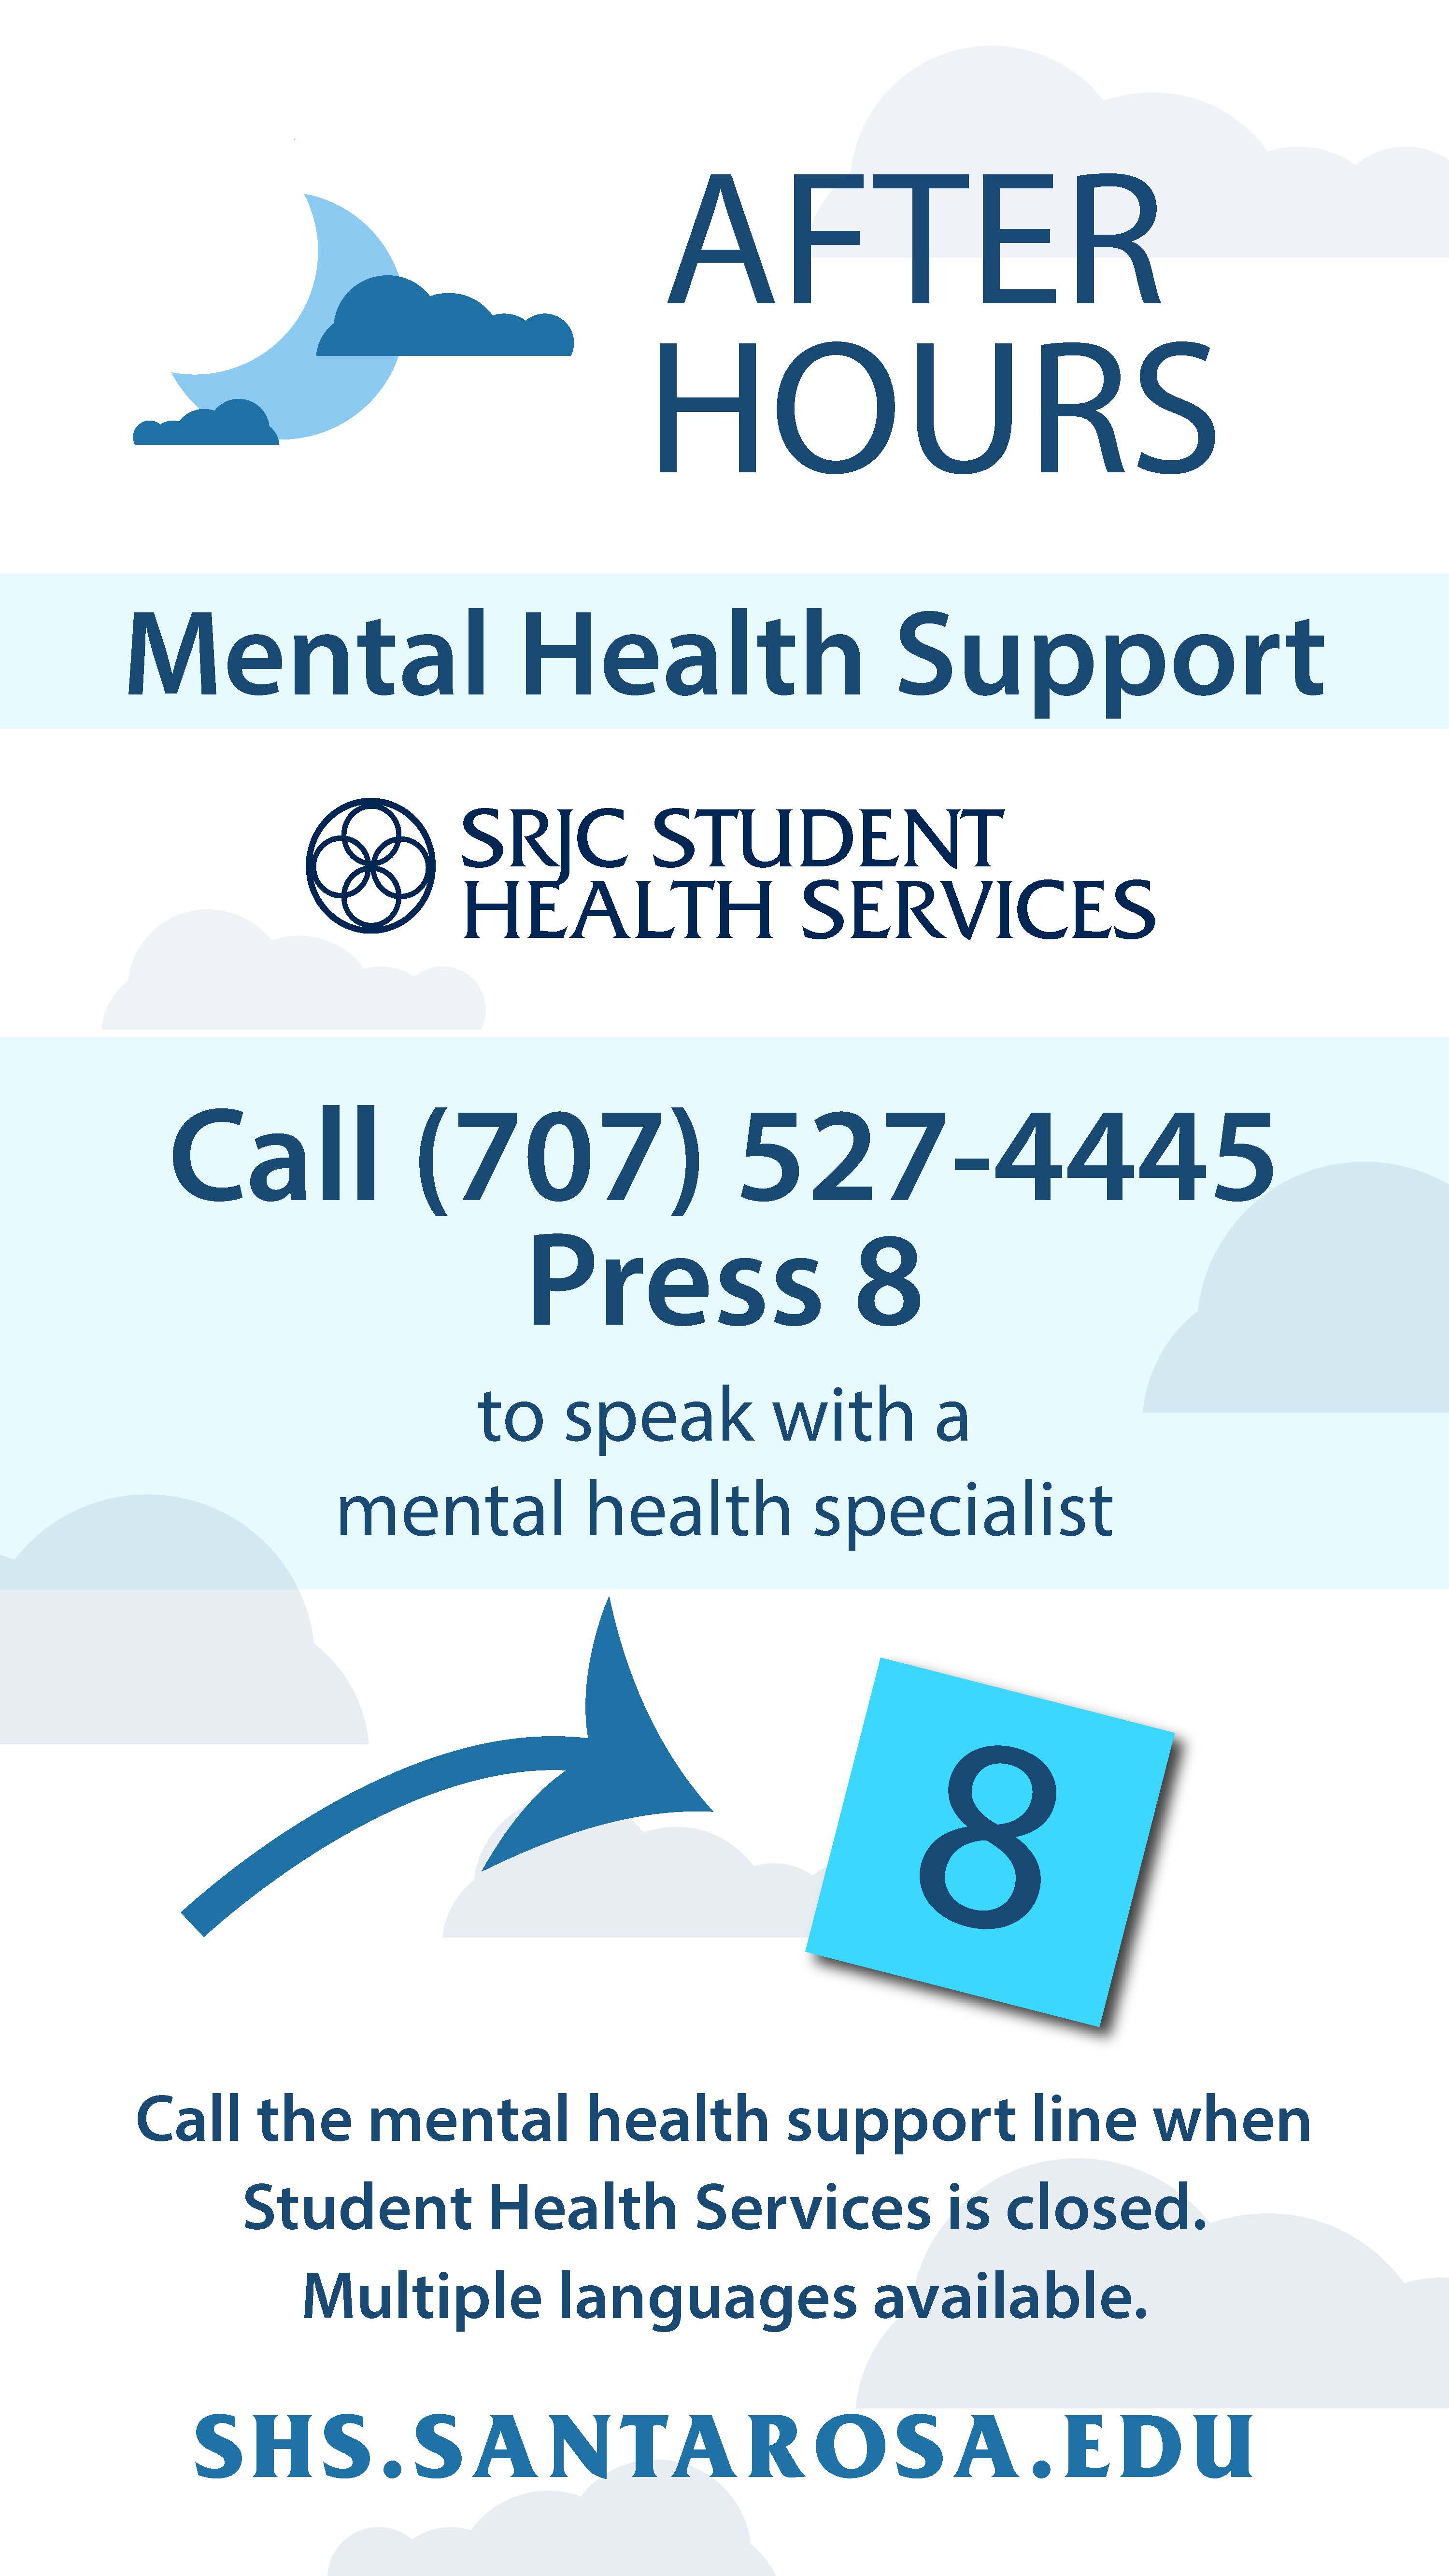 AFTER HOURS Mental Health Support SRJC Student Health Services Call (707) 527-4445 Press 8 to speak with a mental health specialist. Call the mental health support line when Student Health Services is closed. Multiple languages available. SHS.SANTAROSA.EDU